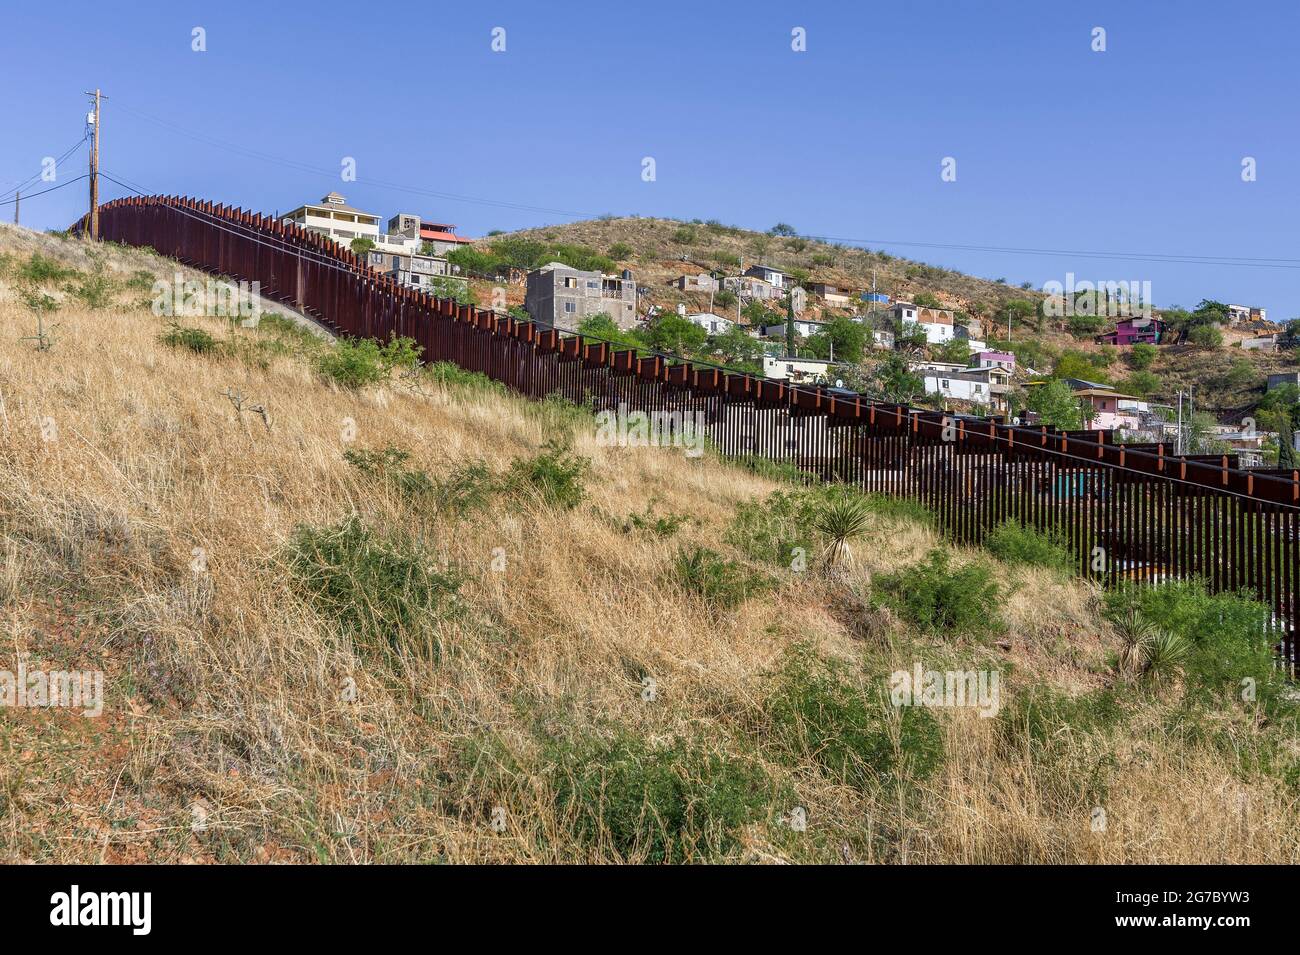 US border fence on the Mexico border, viewed from US side looking into Nogales Sonora Mexico just east of Port of Entry in downtown Nogales.  This typ Stock Photo